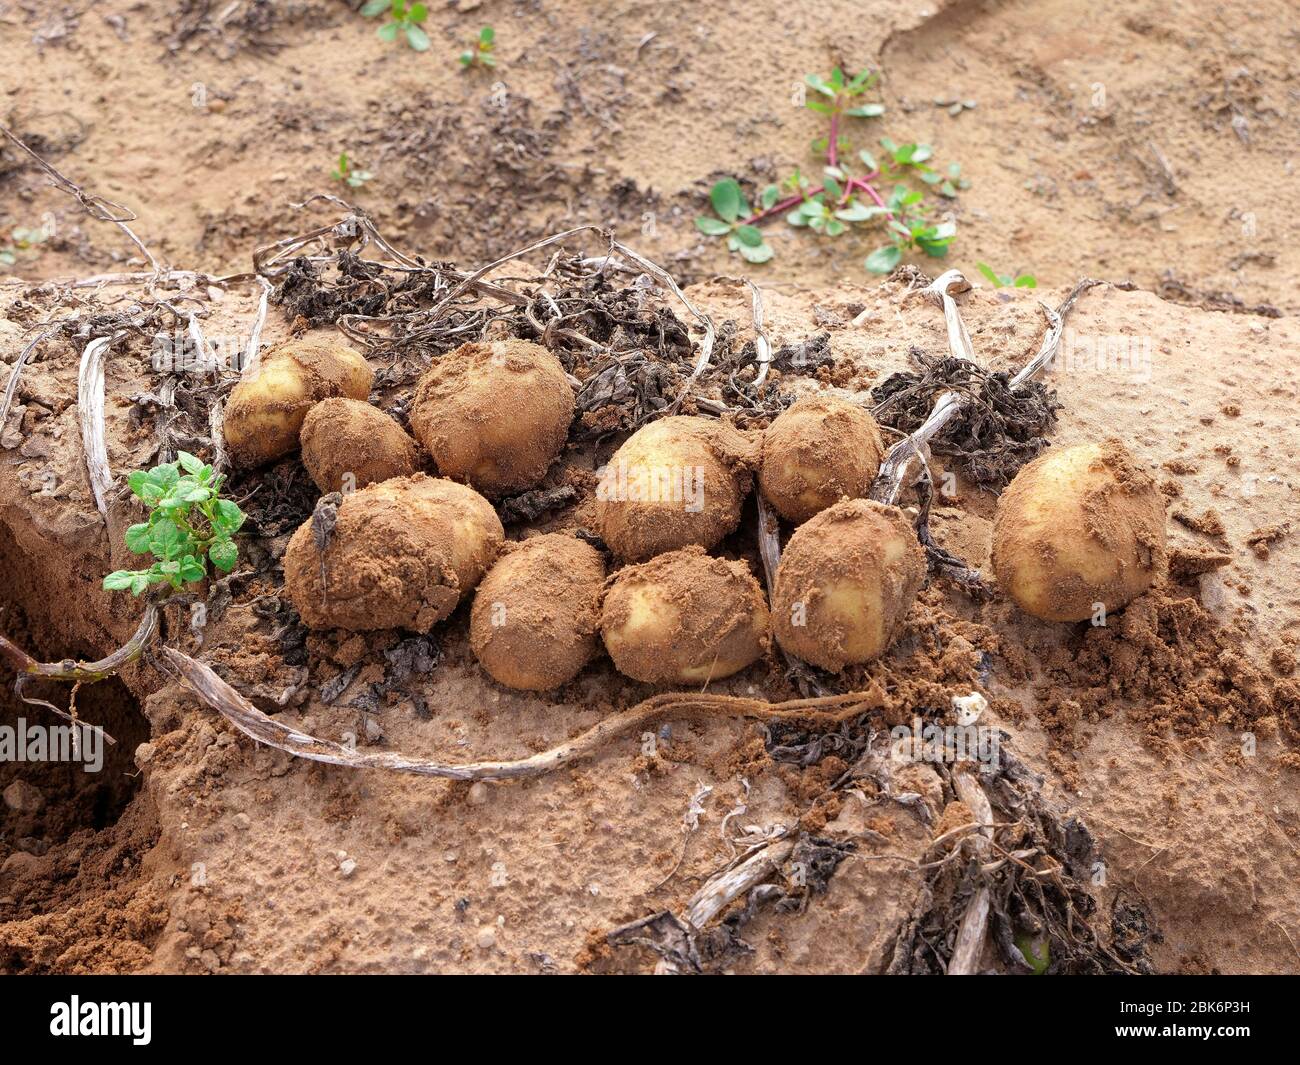 Fresh dug up ripe Potatoes on the ground in a small organic farm. Stock Photo